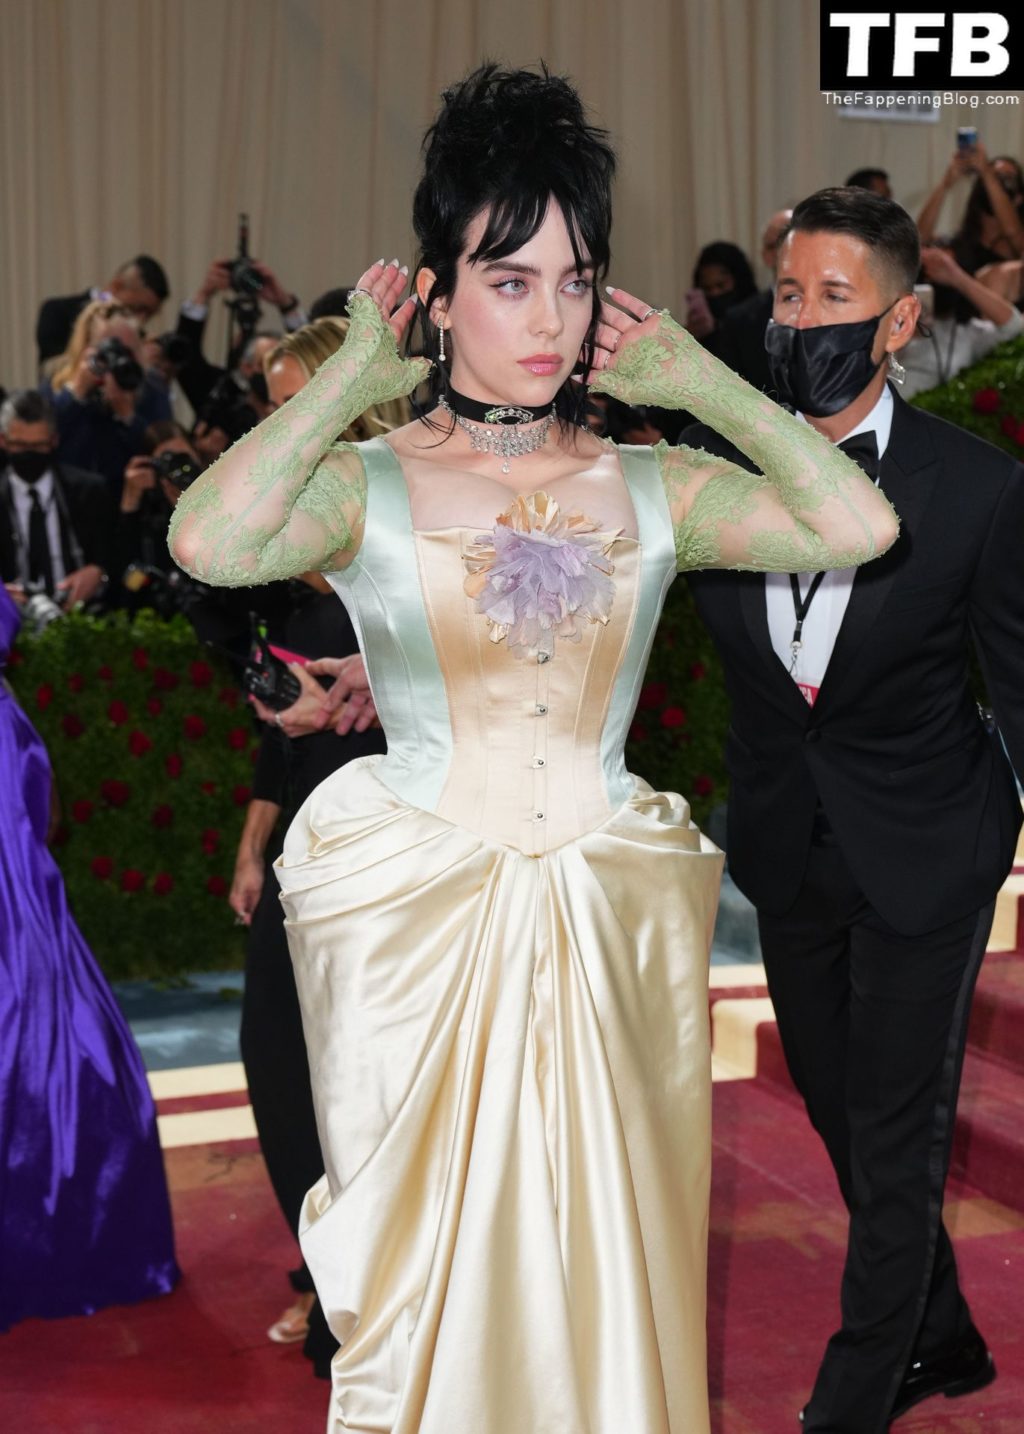 Billie Eilish Sexy The Fappening Blog 57 1024x1434 - Billie Eilish Showcases Nice Cleavage at The 2022 Met Gala in NYC (155 Photos)